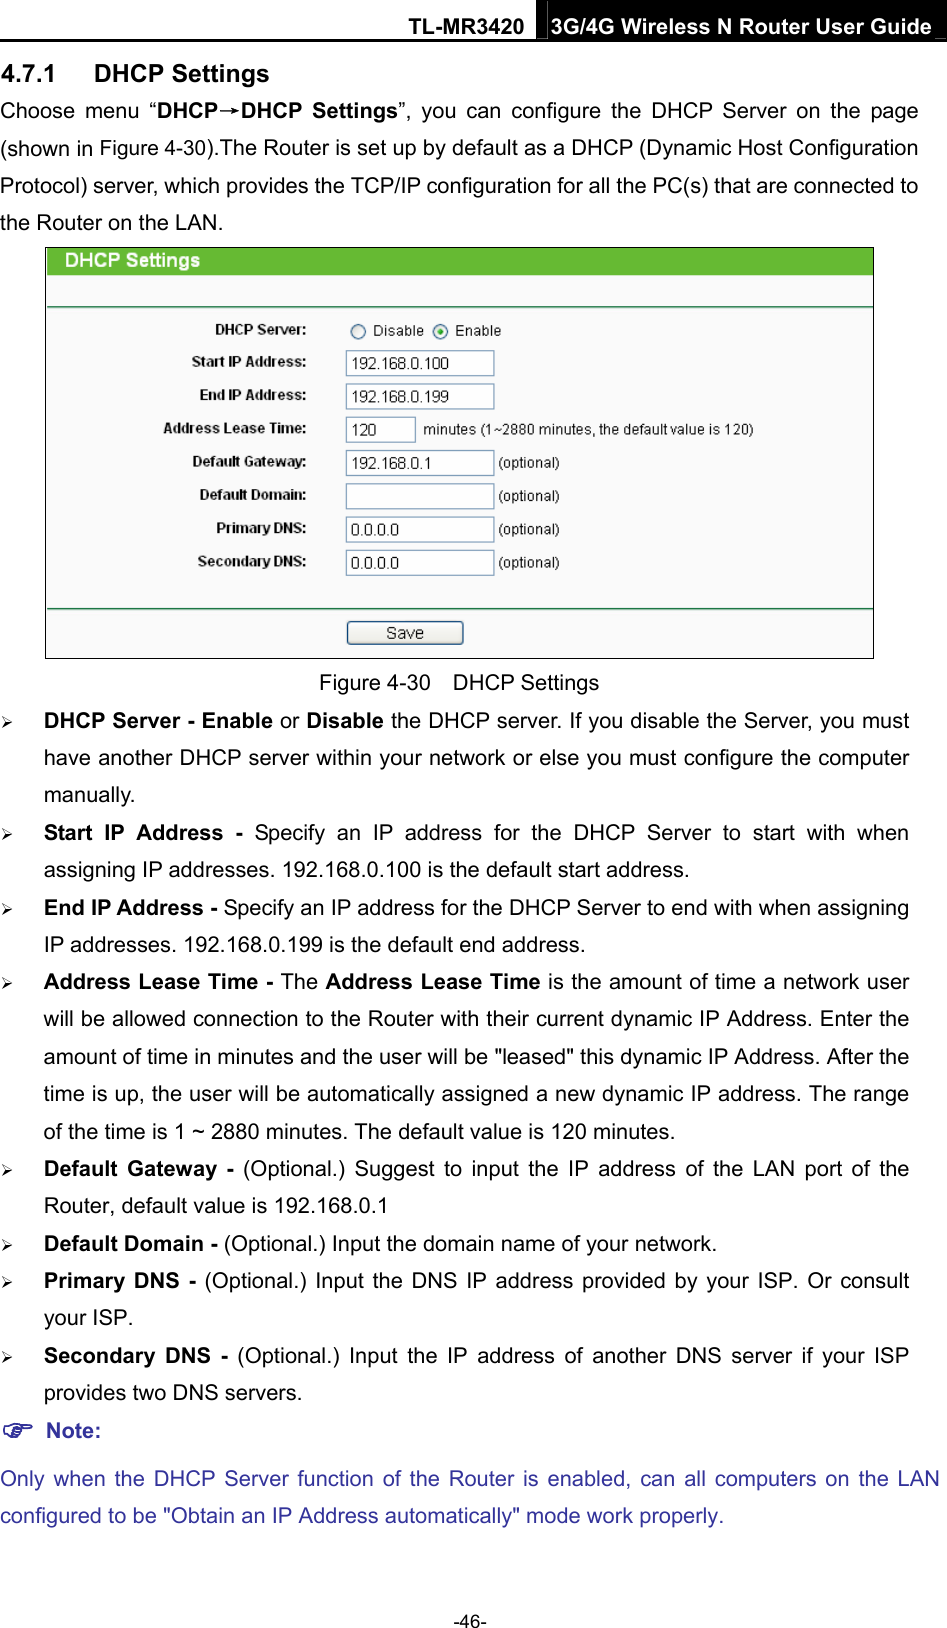 TL-MR3420 3G/4G Wireless N Router User Guide 4.7.1  DHCP Settings Choose menu “DHCP→DHCP Settings”, you can configure the DHCP Server on the page (shown in Figure 4-30).The Router is set up by default as a DHCP (Dynamic Host Configuration Protocol) server, which provides the TCP/IP configuration for all the PC(s) that are connected to the Router on the LAN.    Figure 4-30  DHCP Settings  DHCP Server - Enable or Disable the DHCP server. If you disable the Server, you must have another DHCP server within your network or else you must configure the computer manually.  Start IP Address - Specify an IP address for the DHCP Server to start with when assigning IP addresses. 192.168.0.100 is the default start address.  End IP Address - Specify an IP address for the DHCP Server to end with when assigning IP addresses. 192.168.0.199 is the default end address.  Address Lease Time - The Address Lease Time is the amount of time a network user will be allowed connection to the Router with their current dynamic IP Address. Enter the amount of time in minutes and the user will be &quot;leased&quot; this dynamic IP Address. After the time is up, the user will be automatically assigned a new dynamic IP address. The range of the time is 1 ~ 2880 minutes. The default value is 120 minutes.  Default Gateway - (Optional.) Suggest to input the IP address of the LAN port of the Router, default value is 192.168.0.1  Default Domain - (Optional.) Input the domain name of your network.  Primary DNS - (Optional.) Input the DNS IP address provided by your ISP. Or consult your ISP.  Secondary DNS - (Optional.) Input the IP address of another DNS server if your ISP provides two DNS servers.  Note: Only when the DHCP Server function of the Router is enabled, can all computers on the LAN configured to be &quot;Obtain an IP Address automatically&quot; mode work properly.  -46- 